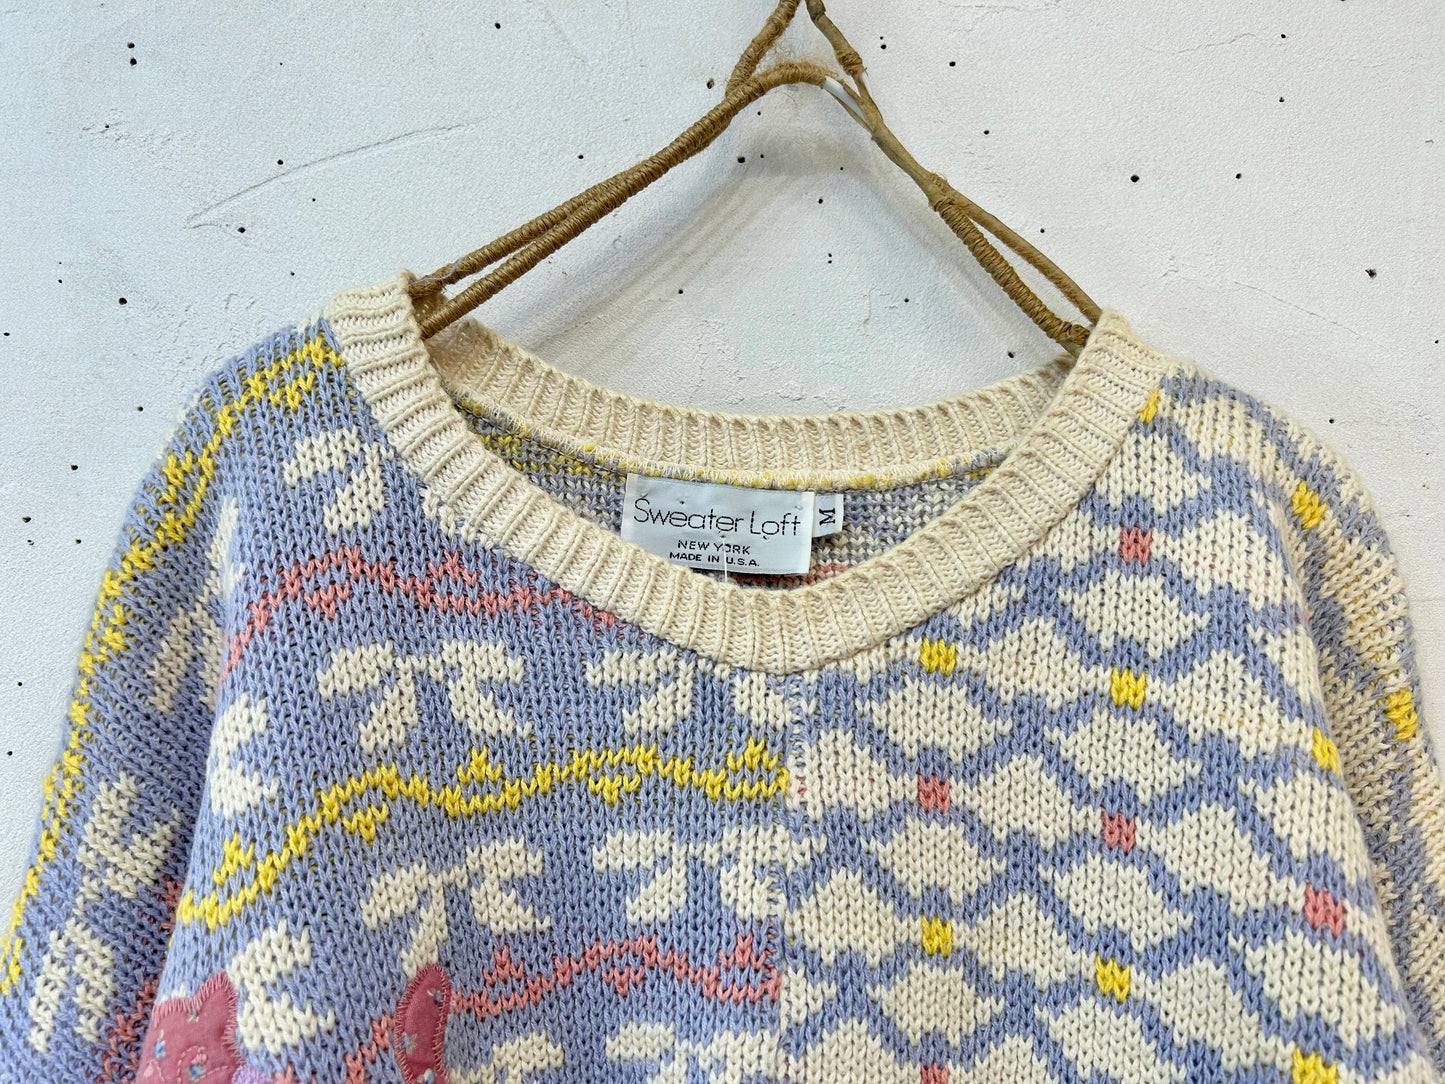 Vintage Cotton Knit Sweater MADE IN USA [K25441]